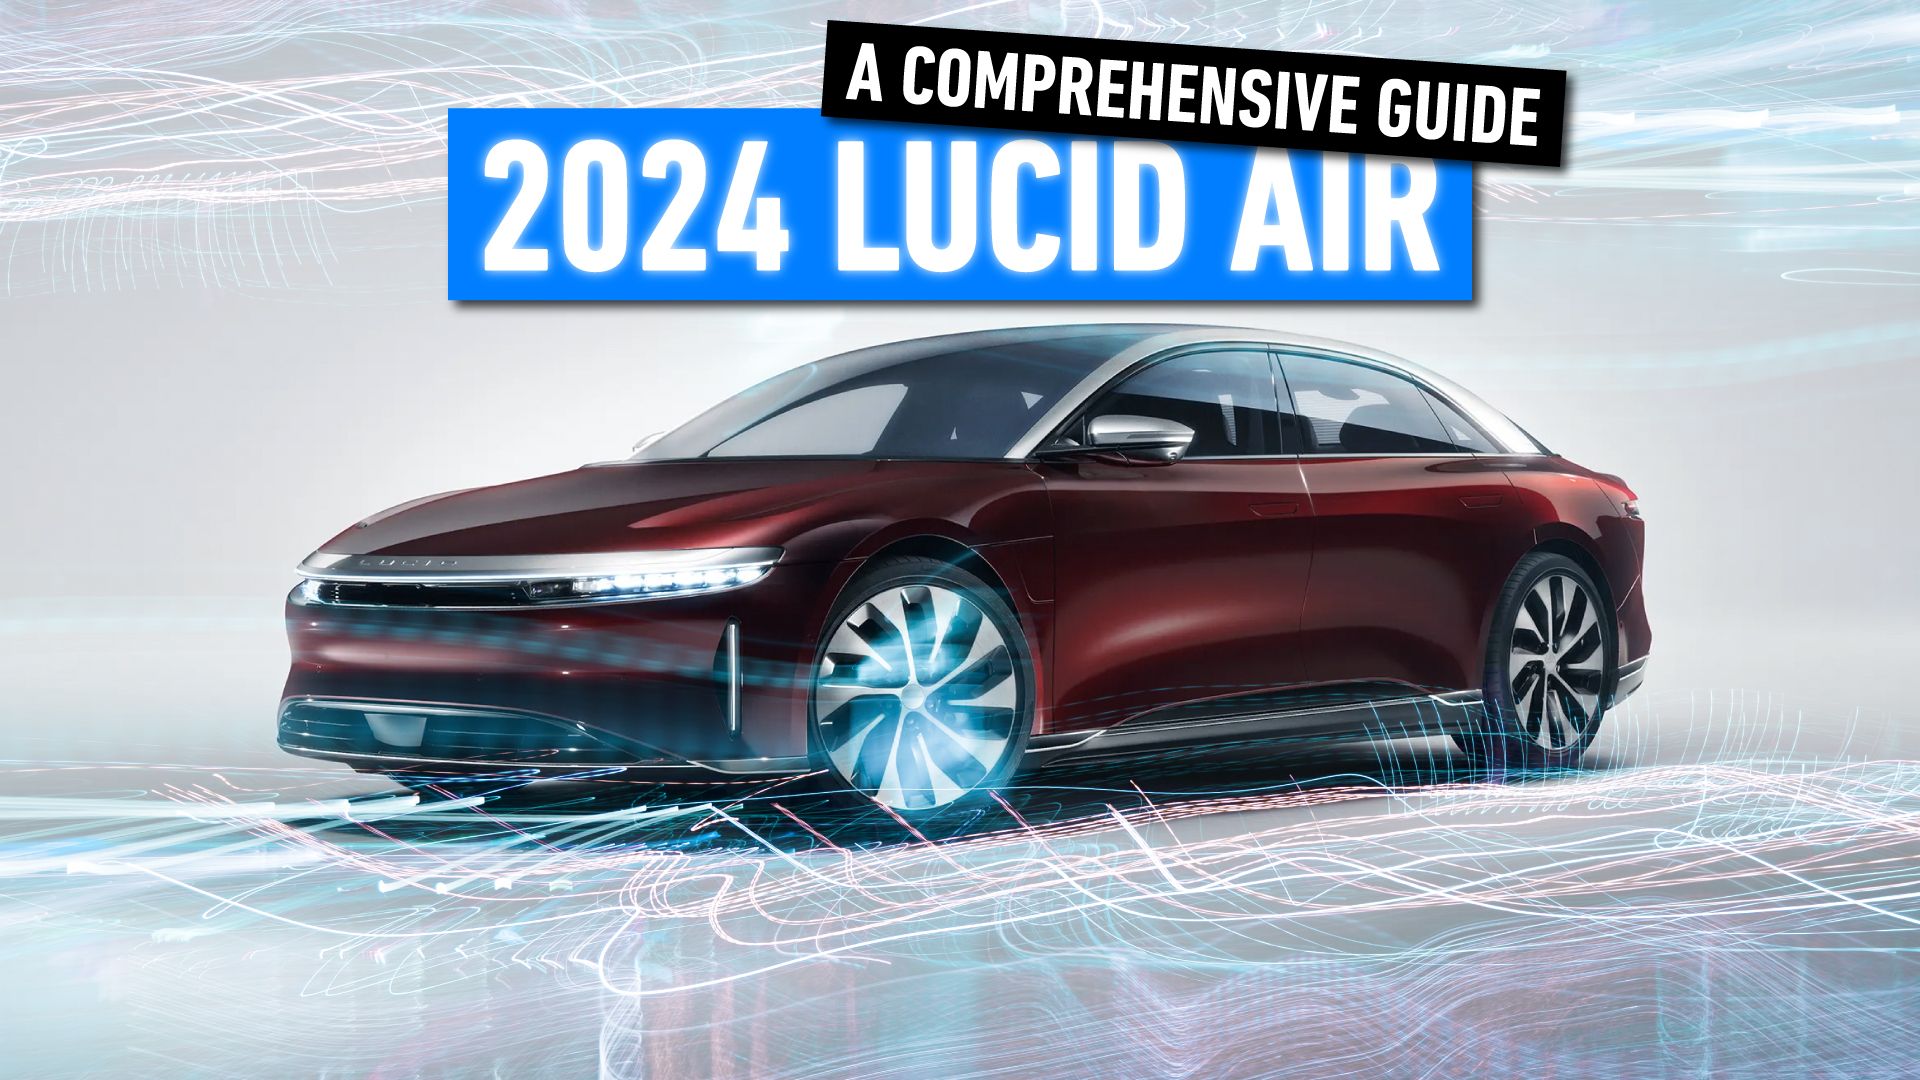 2024 Lucid Air: A Comprehensive Guide On Features, Specs, And Pricing